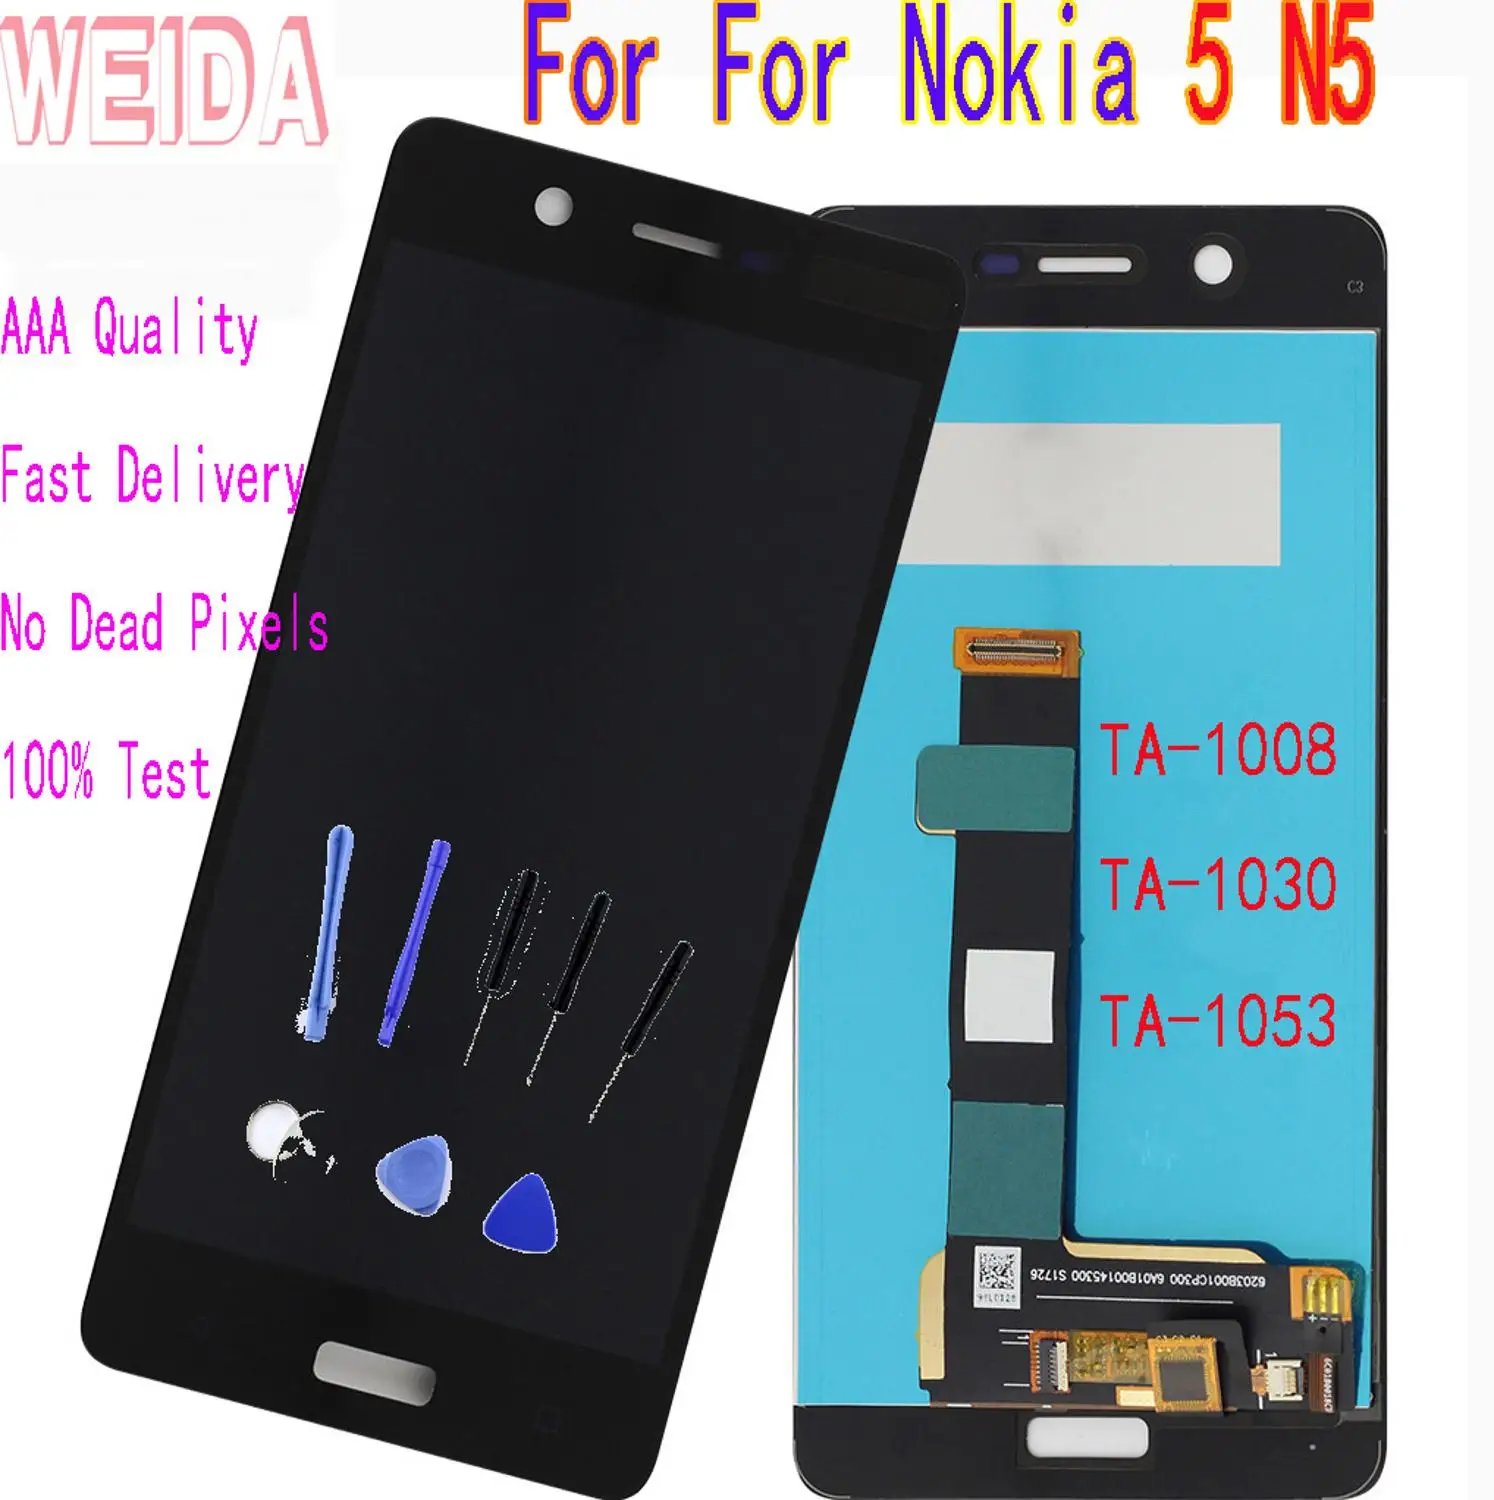 

WEIDA For Nokia 5 N5 TA-1008 TA-1053 TA-1030 LCD Display Touch Screen Digitizer Assembly Frame with Tool